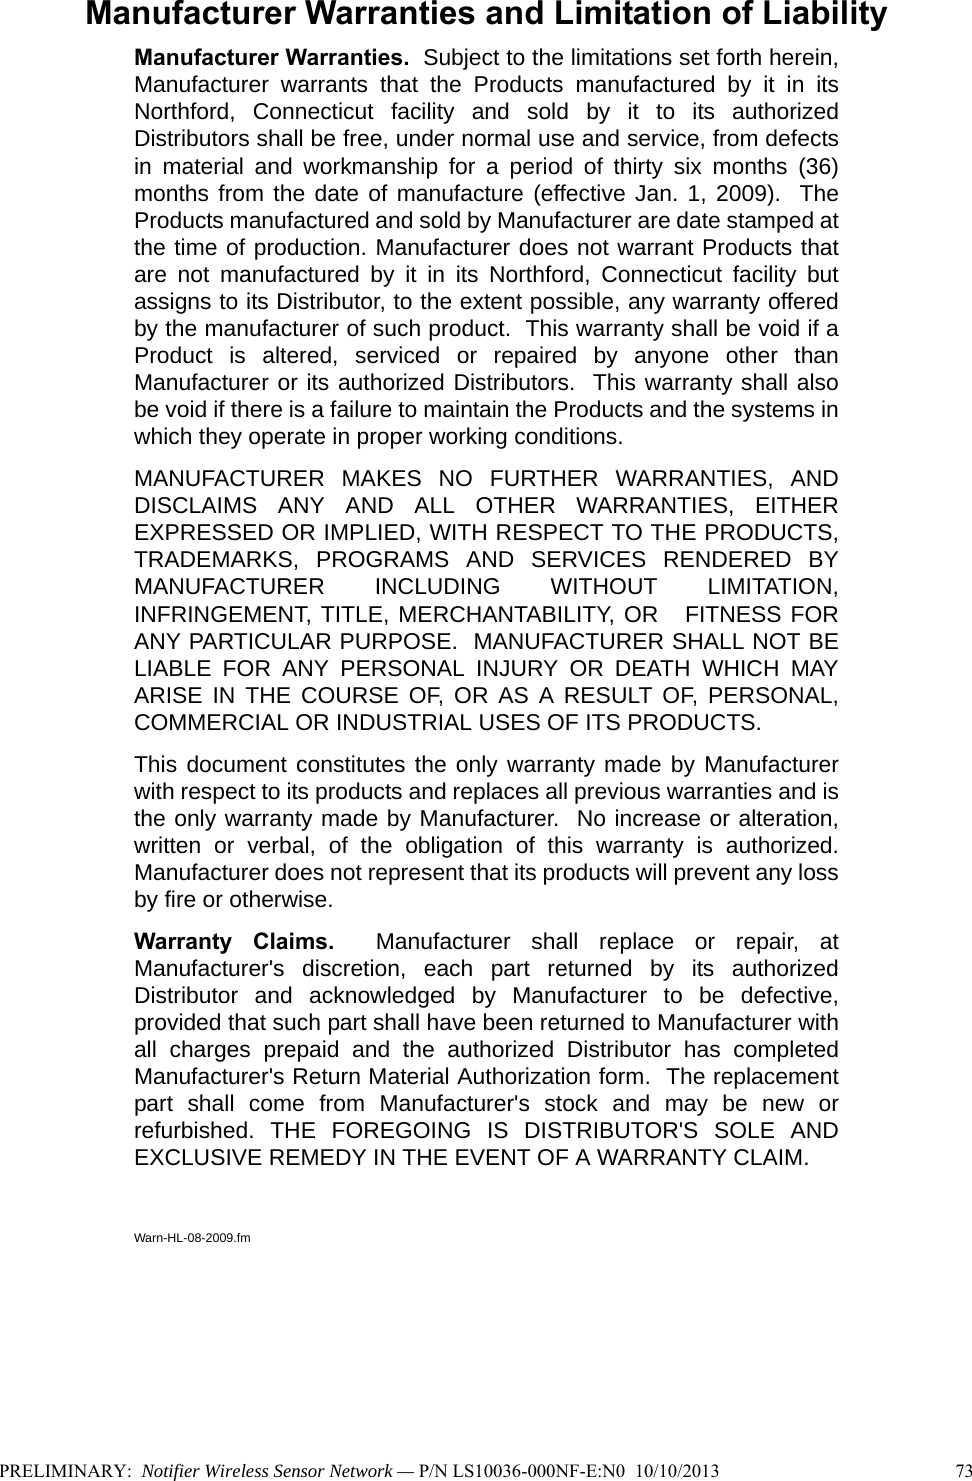 Manufacturer Warranties and Limitation of LiabilityManufacturer Warranties.  Subject to the limitations set forth herein,Manufacturer warrants that the Products manufactured by it in itsNorthford, Connecticut facility and sold by it to its authorizedDistributors shall be free, under normal use and service, from defectsin material and workmanship for a period of thirty six months (36)months from the date of manufacture (effective Jan. 1, 2009).  TheProducts manufactured and sold by Manufacturer are date stamped atthe time of production. Manufacturer does not warrant Products thatare not manufactured by it in its Northford, Connecticut facility butassigns to its Distributor, to the extent possible, any warranty offeredby the manufacturer of such product.  This warranty shall be void if aProduct is altered, serviced or repaired by anyone other thanManufacturer or its authorized Distributors.  This warranty shall alsobe void if there is a failure to maintain the Products and the systems inwhich they operate in proper working conditions.MANUFACTURER MAKES NO FURTHER WARRANTIES, ANDDISCLAIMS ANY AND ALL OTHER WARRANTIES, EITHEREXPRESSED OR IMPLIED, WITH RESPECT TO THE PRODUCTS,TRADEMARKS, PROGRAMS AND SERVICES RENDERED BYMANUFACTURER INCLUDING WITHOUT LIMITATION,INFRINGEMENT, TITLE, MERCHANTABILITY, OR   FITNESS FORANY PARTICULAR PURPOSE.  MANUFACTURER SHALL NOT BELIABLE FOR ANY PERSONAL INJURY OR DEATH WHICH MAYARISE IN THE COURSE OF, OR AS A RESULT OF, PERSONAL,COMMERCIAL OR INDUSTRIAL USES OF ITS PRODUCTS.This document constitutes the only warranty made by Manufacturerwith respect to its products and replaces all previous warranties and isthe only warranty made by Manufacturer.  No increase or alteration,written or verbal, of the obligation of this warranty is authorized.Manufacturer does not represent that its products will prevent any lossby fire or otherwise.Warranty Claims.  Manufacturer shall replace or repair, atManufacturer&apos;s discretion, each part returned by its authorizedDistributor and acknowledged by Manufacturer to be defective,provided that such part shall have been returned to Manufacturer withall charges prepaid and the authorized Distributor has completedManufacturer&apos;s Return Material Authorization form.  The replacementpart shall come from Manufacturer&apos;s stock and may be new orrefurbished. THE FOREGOING IS DISTRIBUTOR&apos;S SOLE ANDEXCLUSIVE REMEDY IN THE EVENT OF A WARRANTY CLAIM.  Warn-HL-08-2009.fmPRELIMINARY:  Notifier Wireless Sensor Network — P/N LS10036-000NF-E:N0  10/10/2013 73